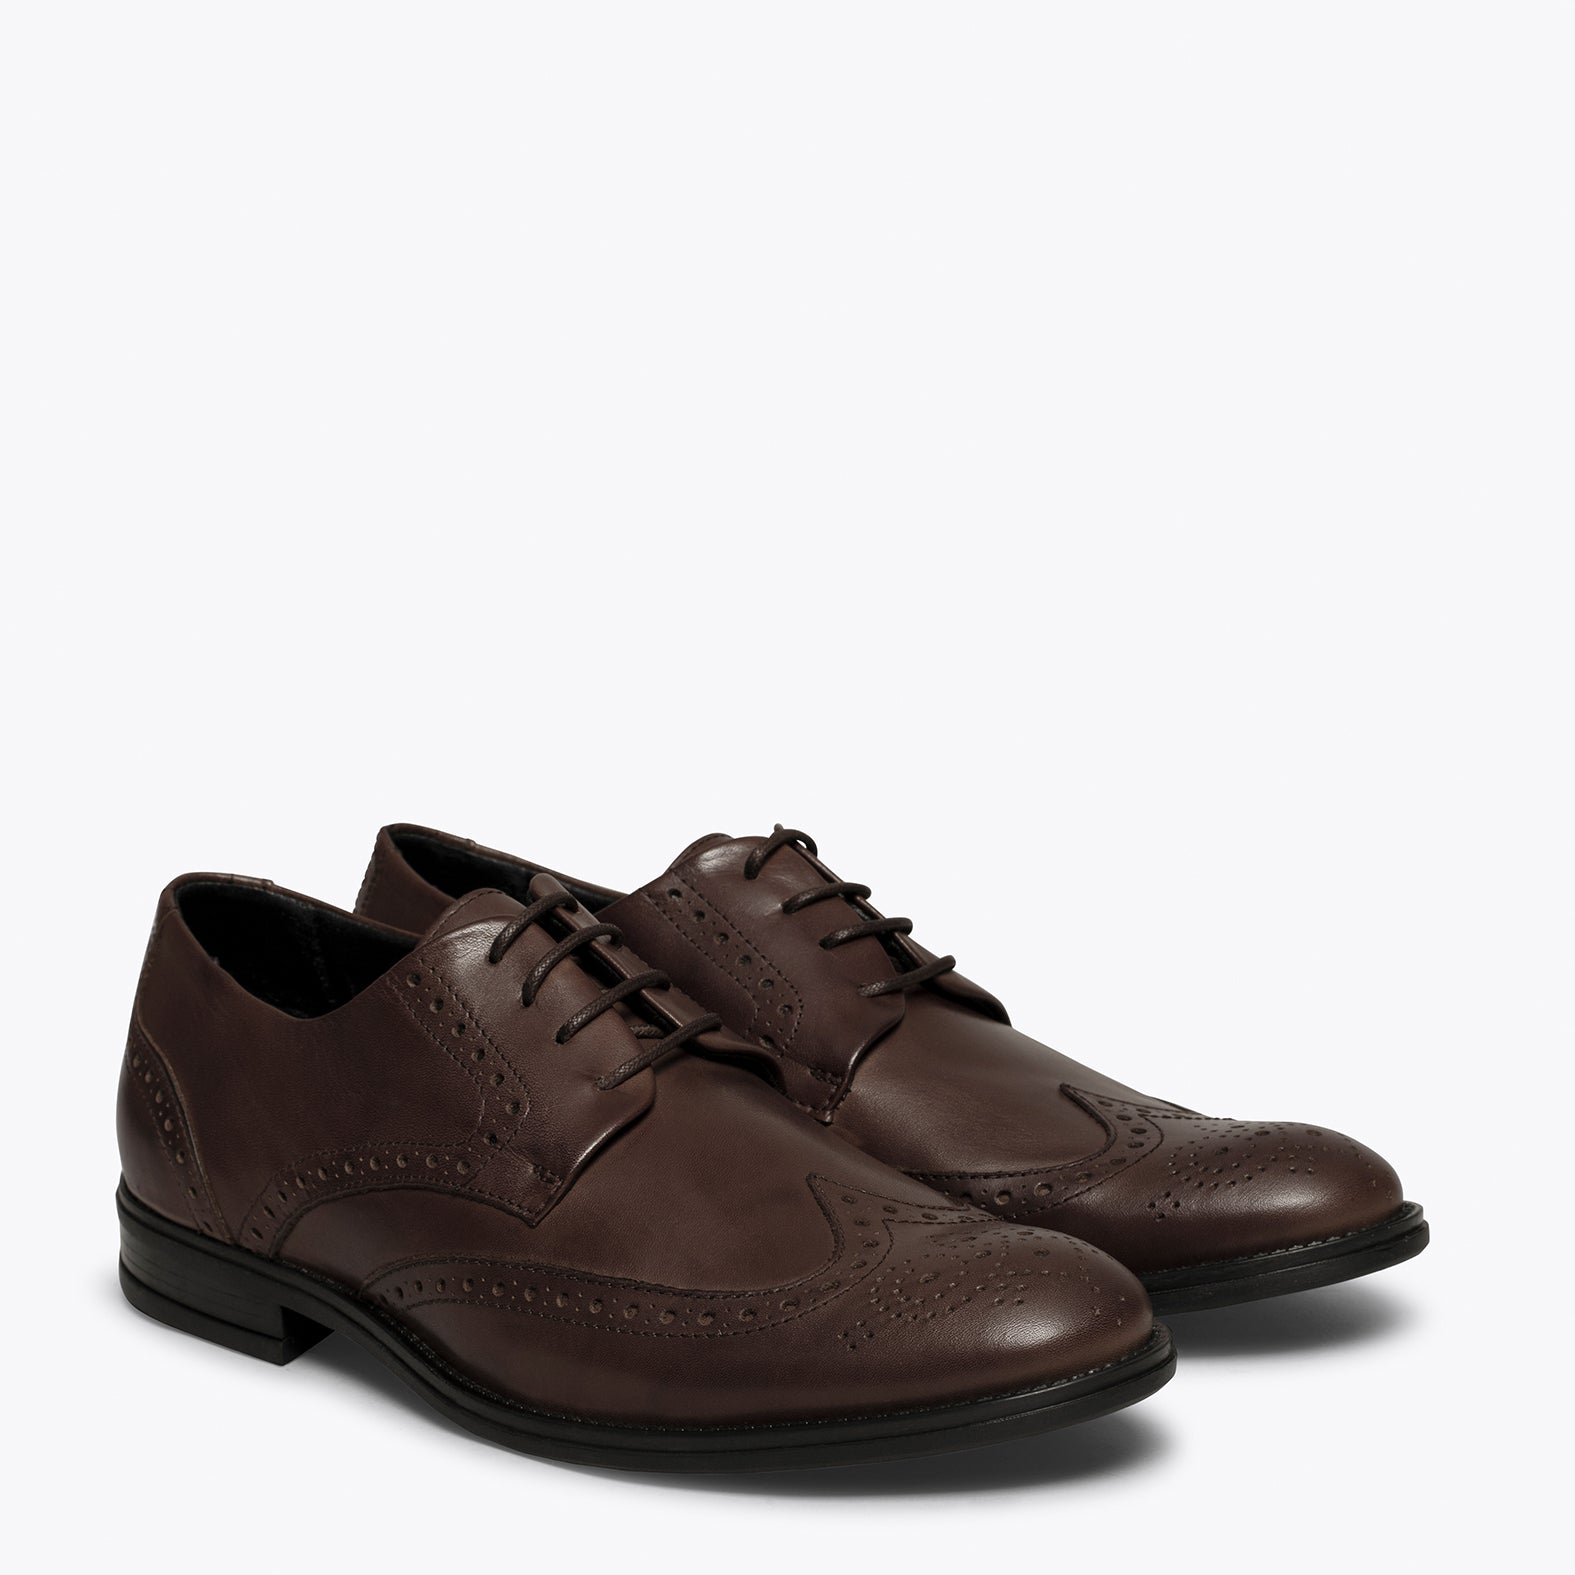 OXFORD - Chaussure homme CHOCOLAT avec coupe anglaise